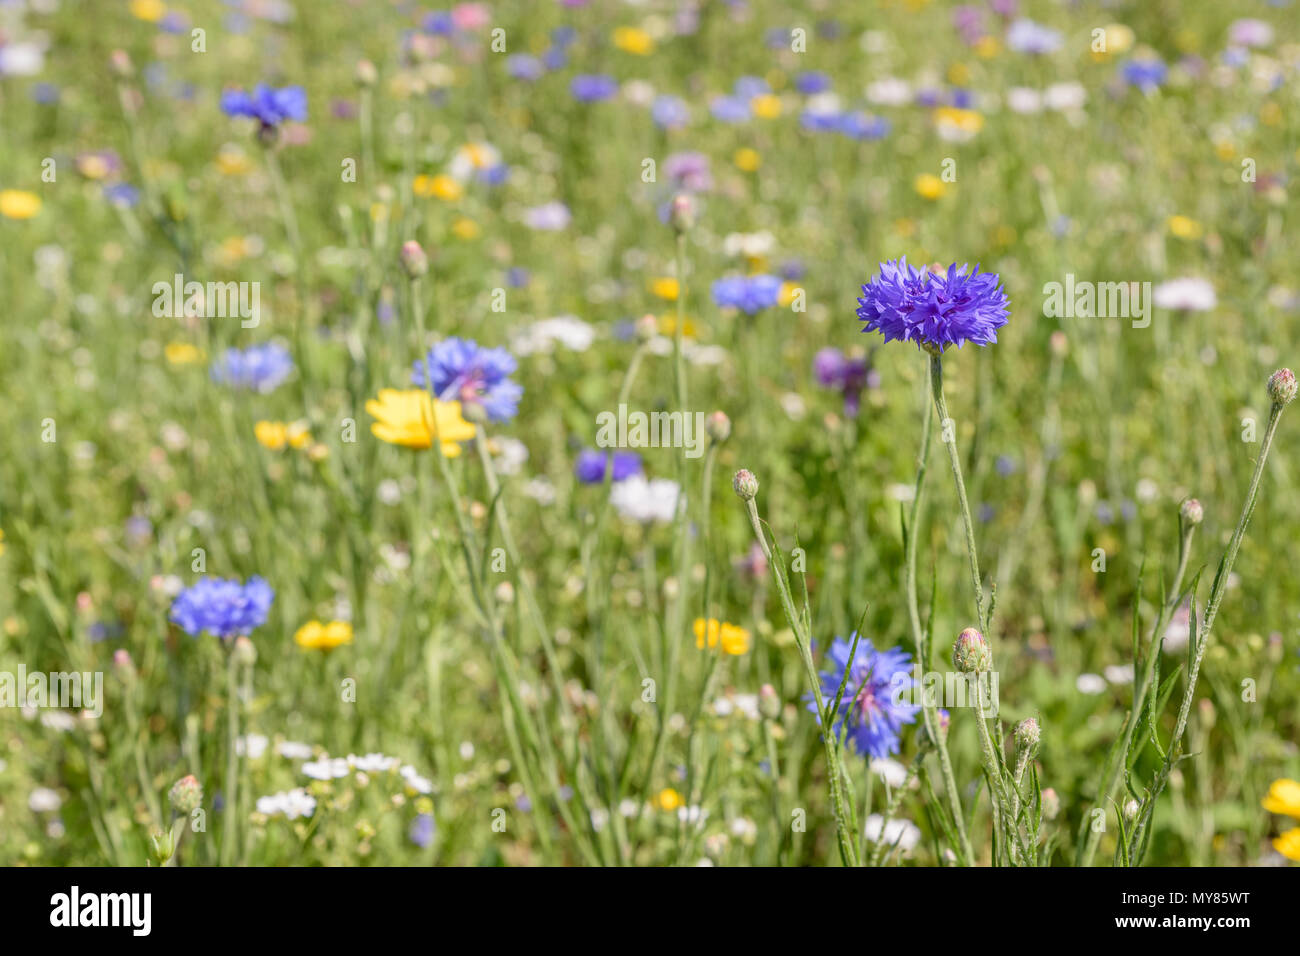 A field full of wild flowers on a sunny day during early summer with depht of field and a blue corn flower in focus. Stock Photo